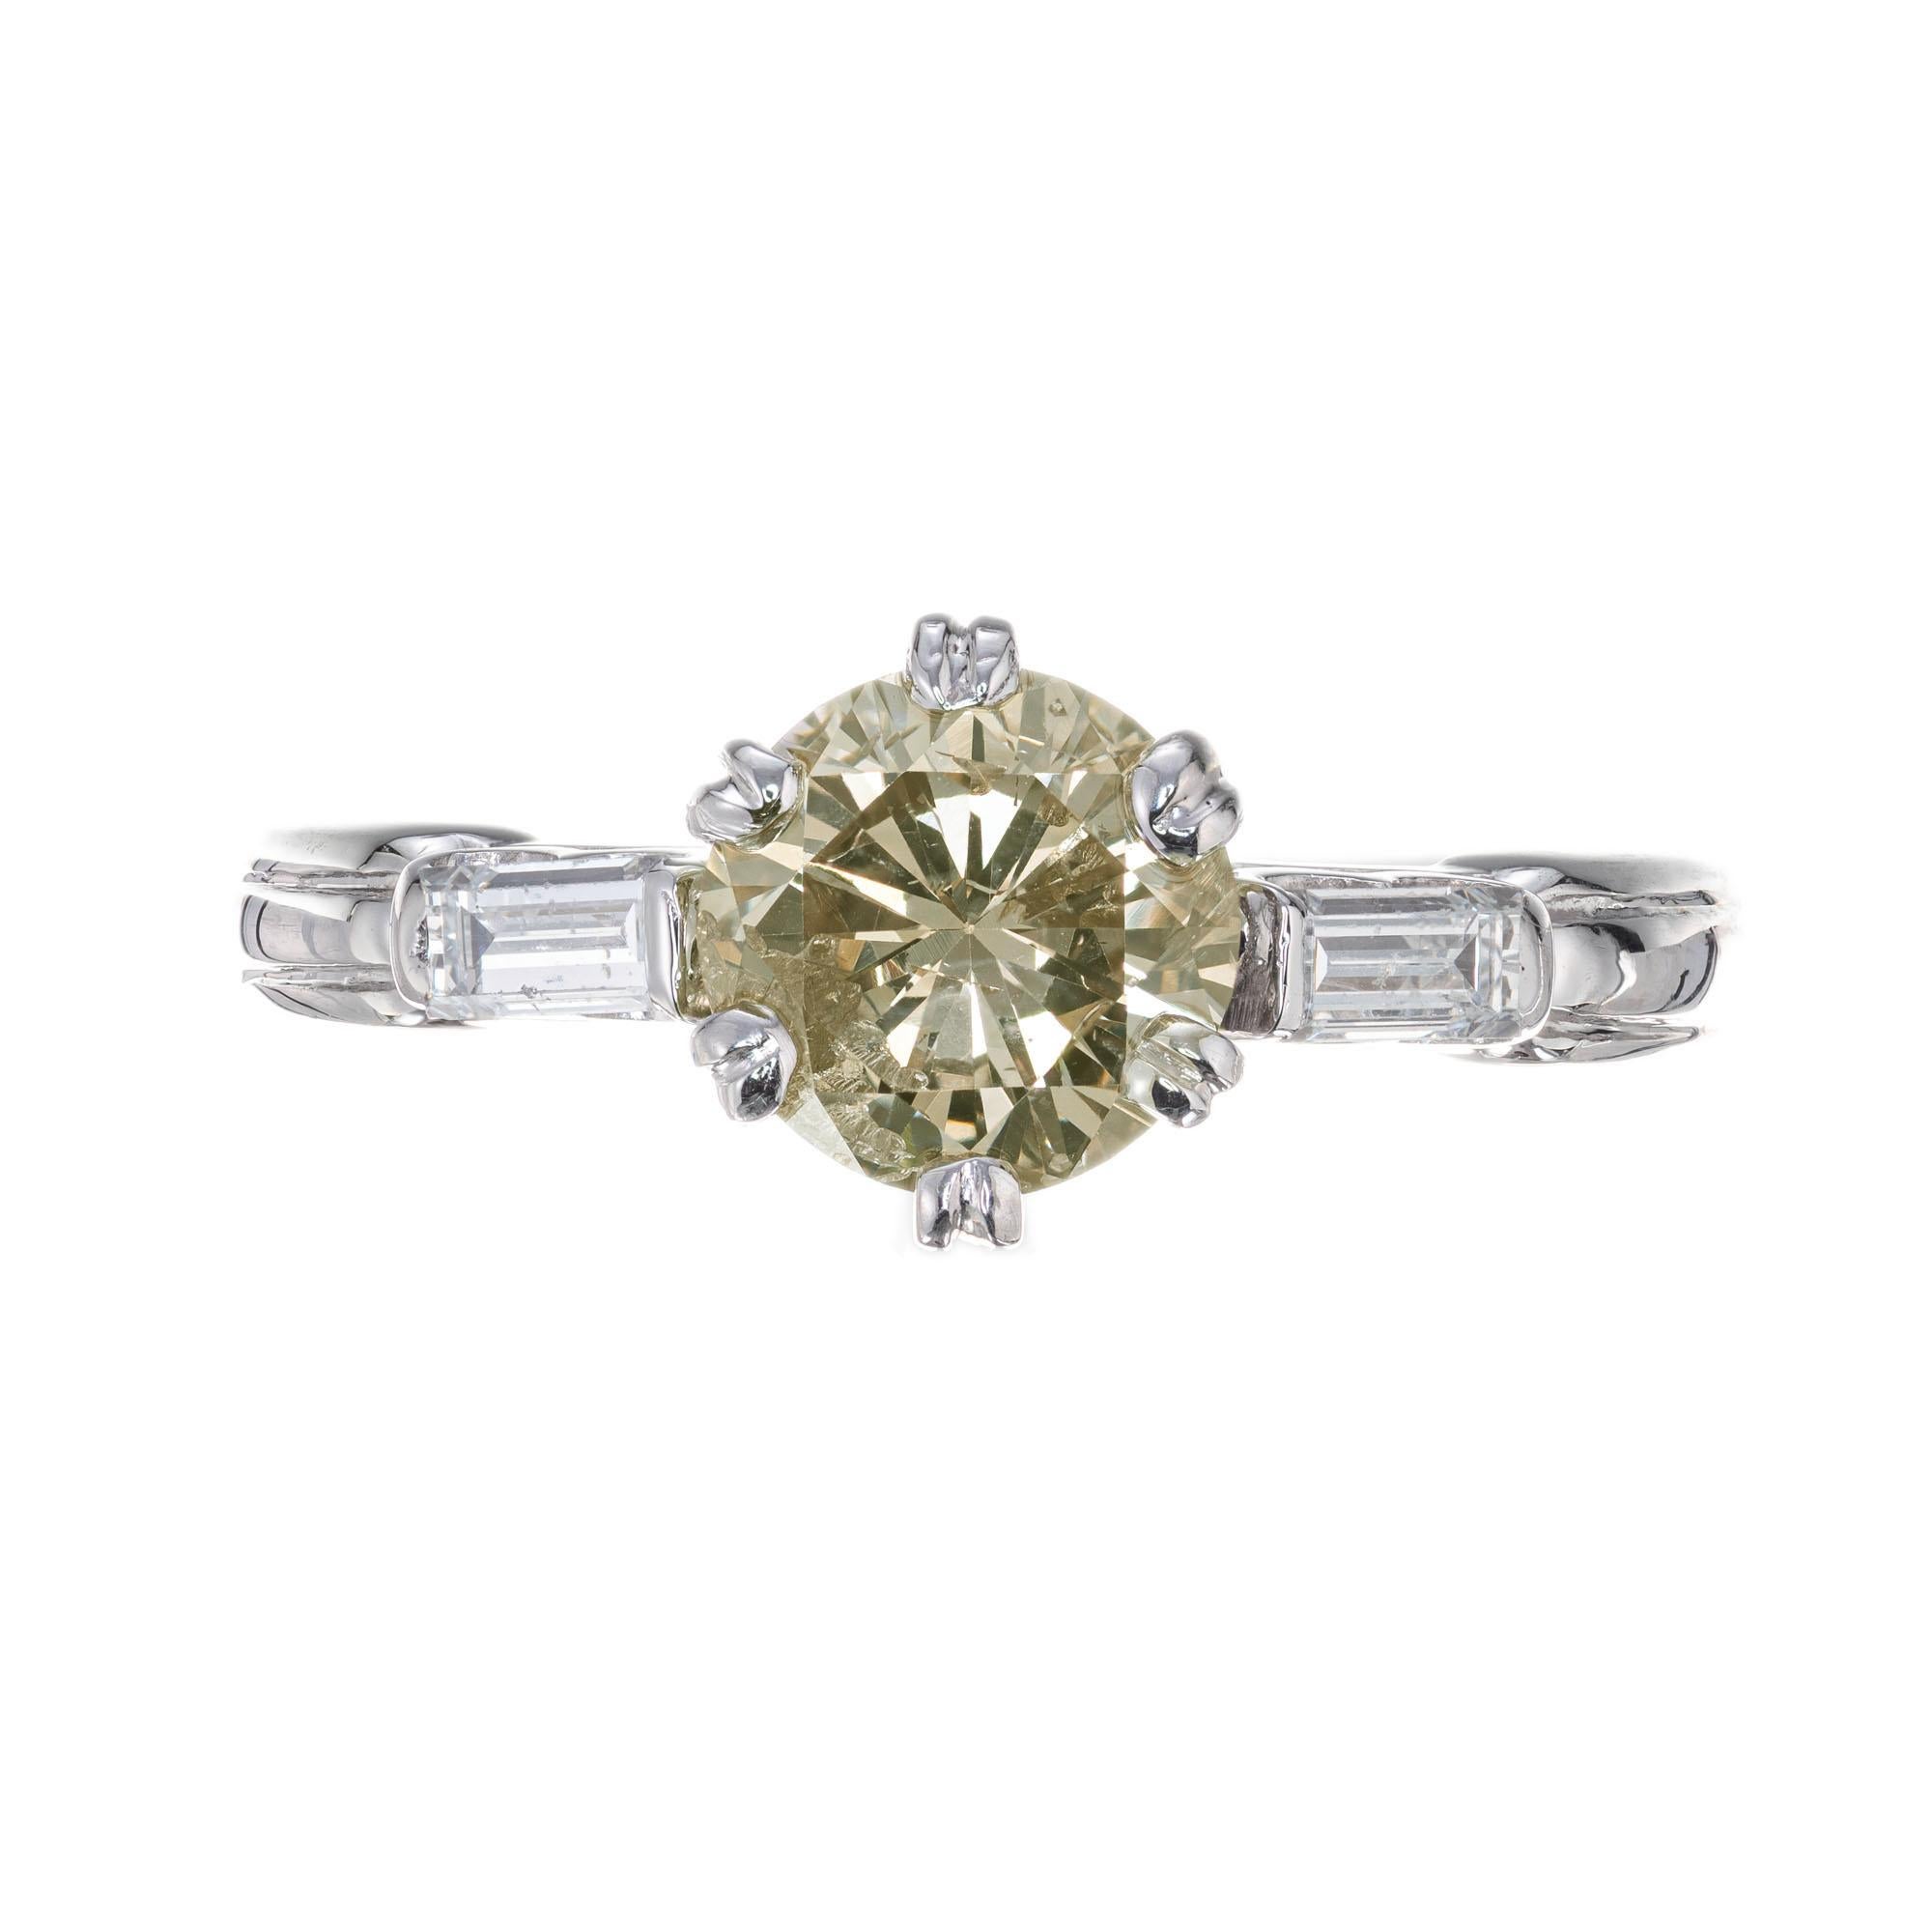 1940's diamond engagement ring. GIA certified natural light brown center diamond with two baguette cut side diamonds in a platinum six prong, three-stone setting. Natural color GIA certified light brown diamond

1 round transitional cut light brown